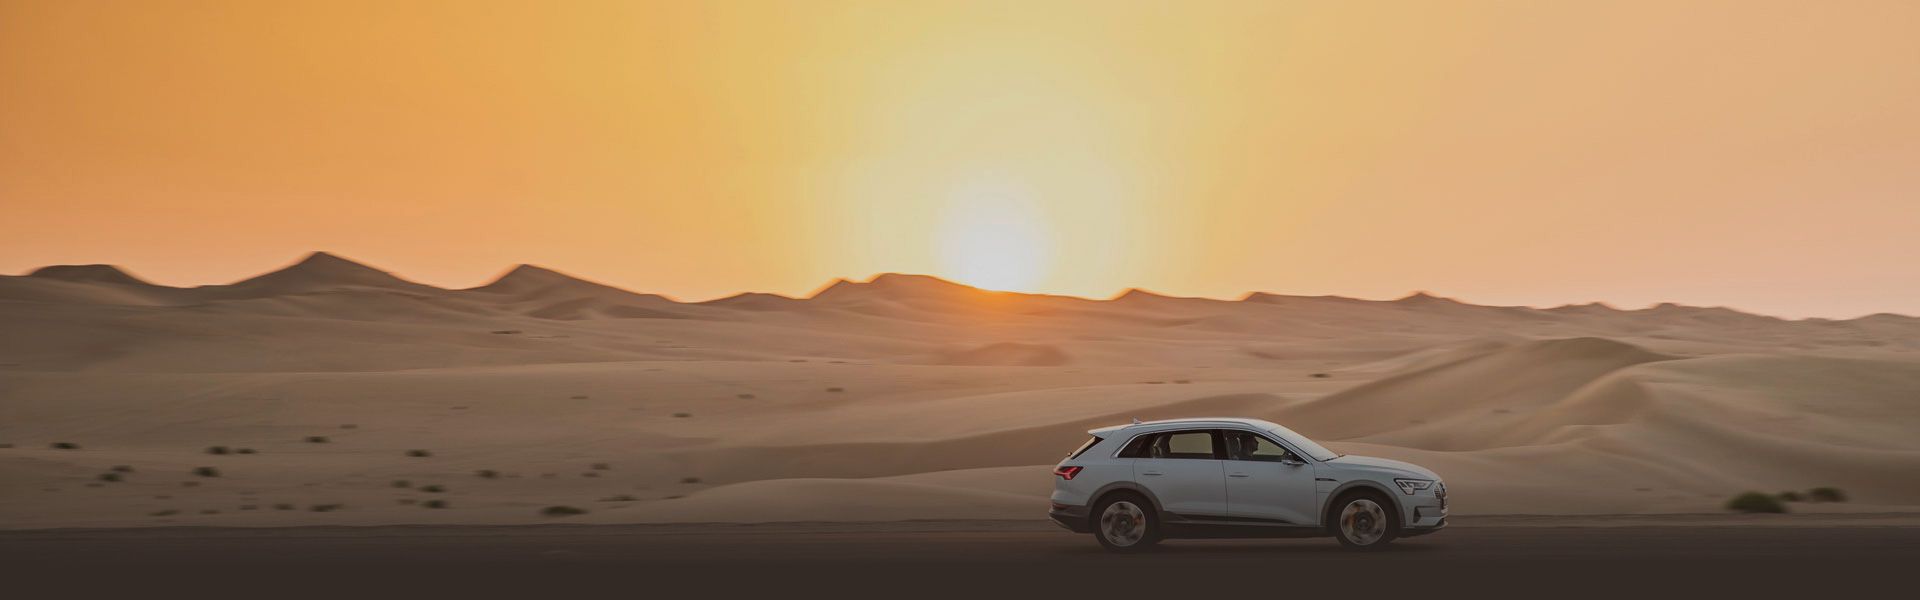 Audi drives in a desert at sunset